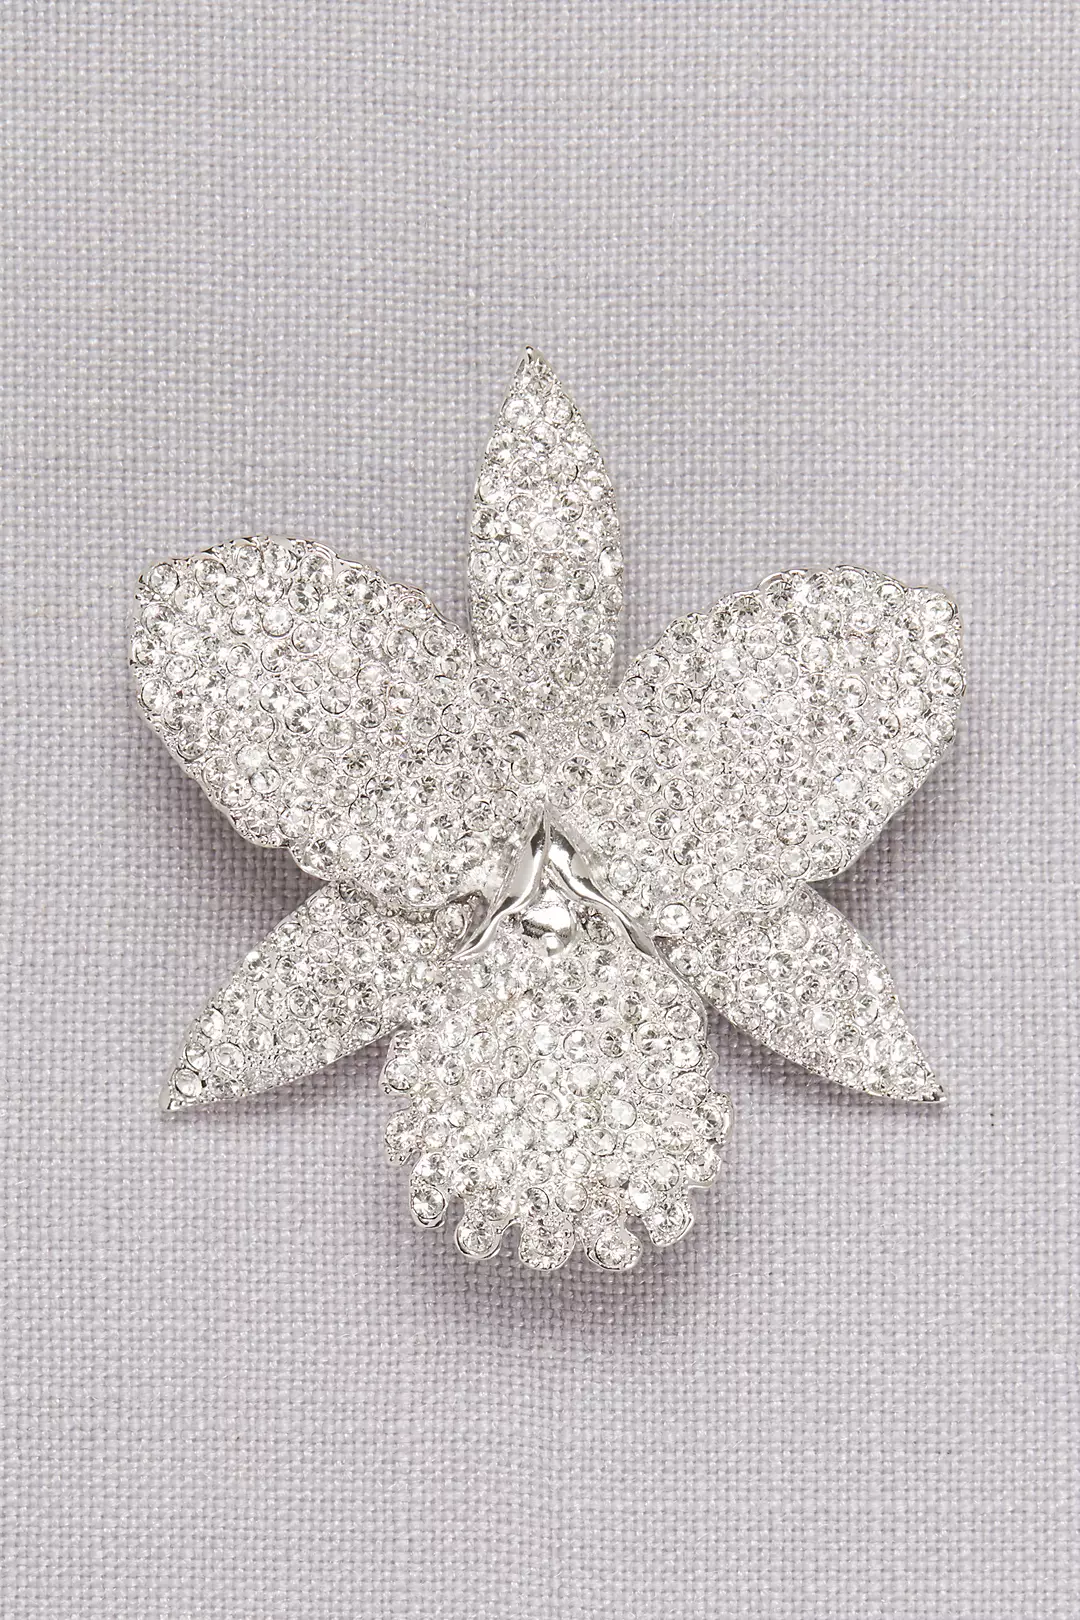 Pave Orchid Brooch Image